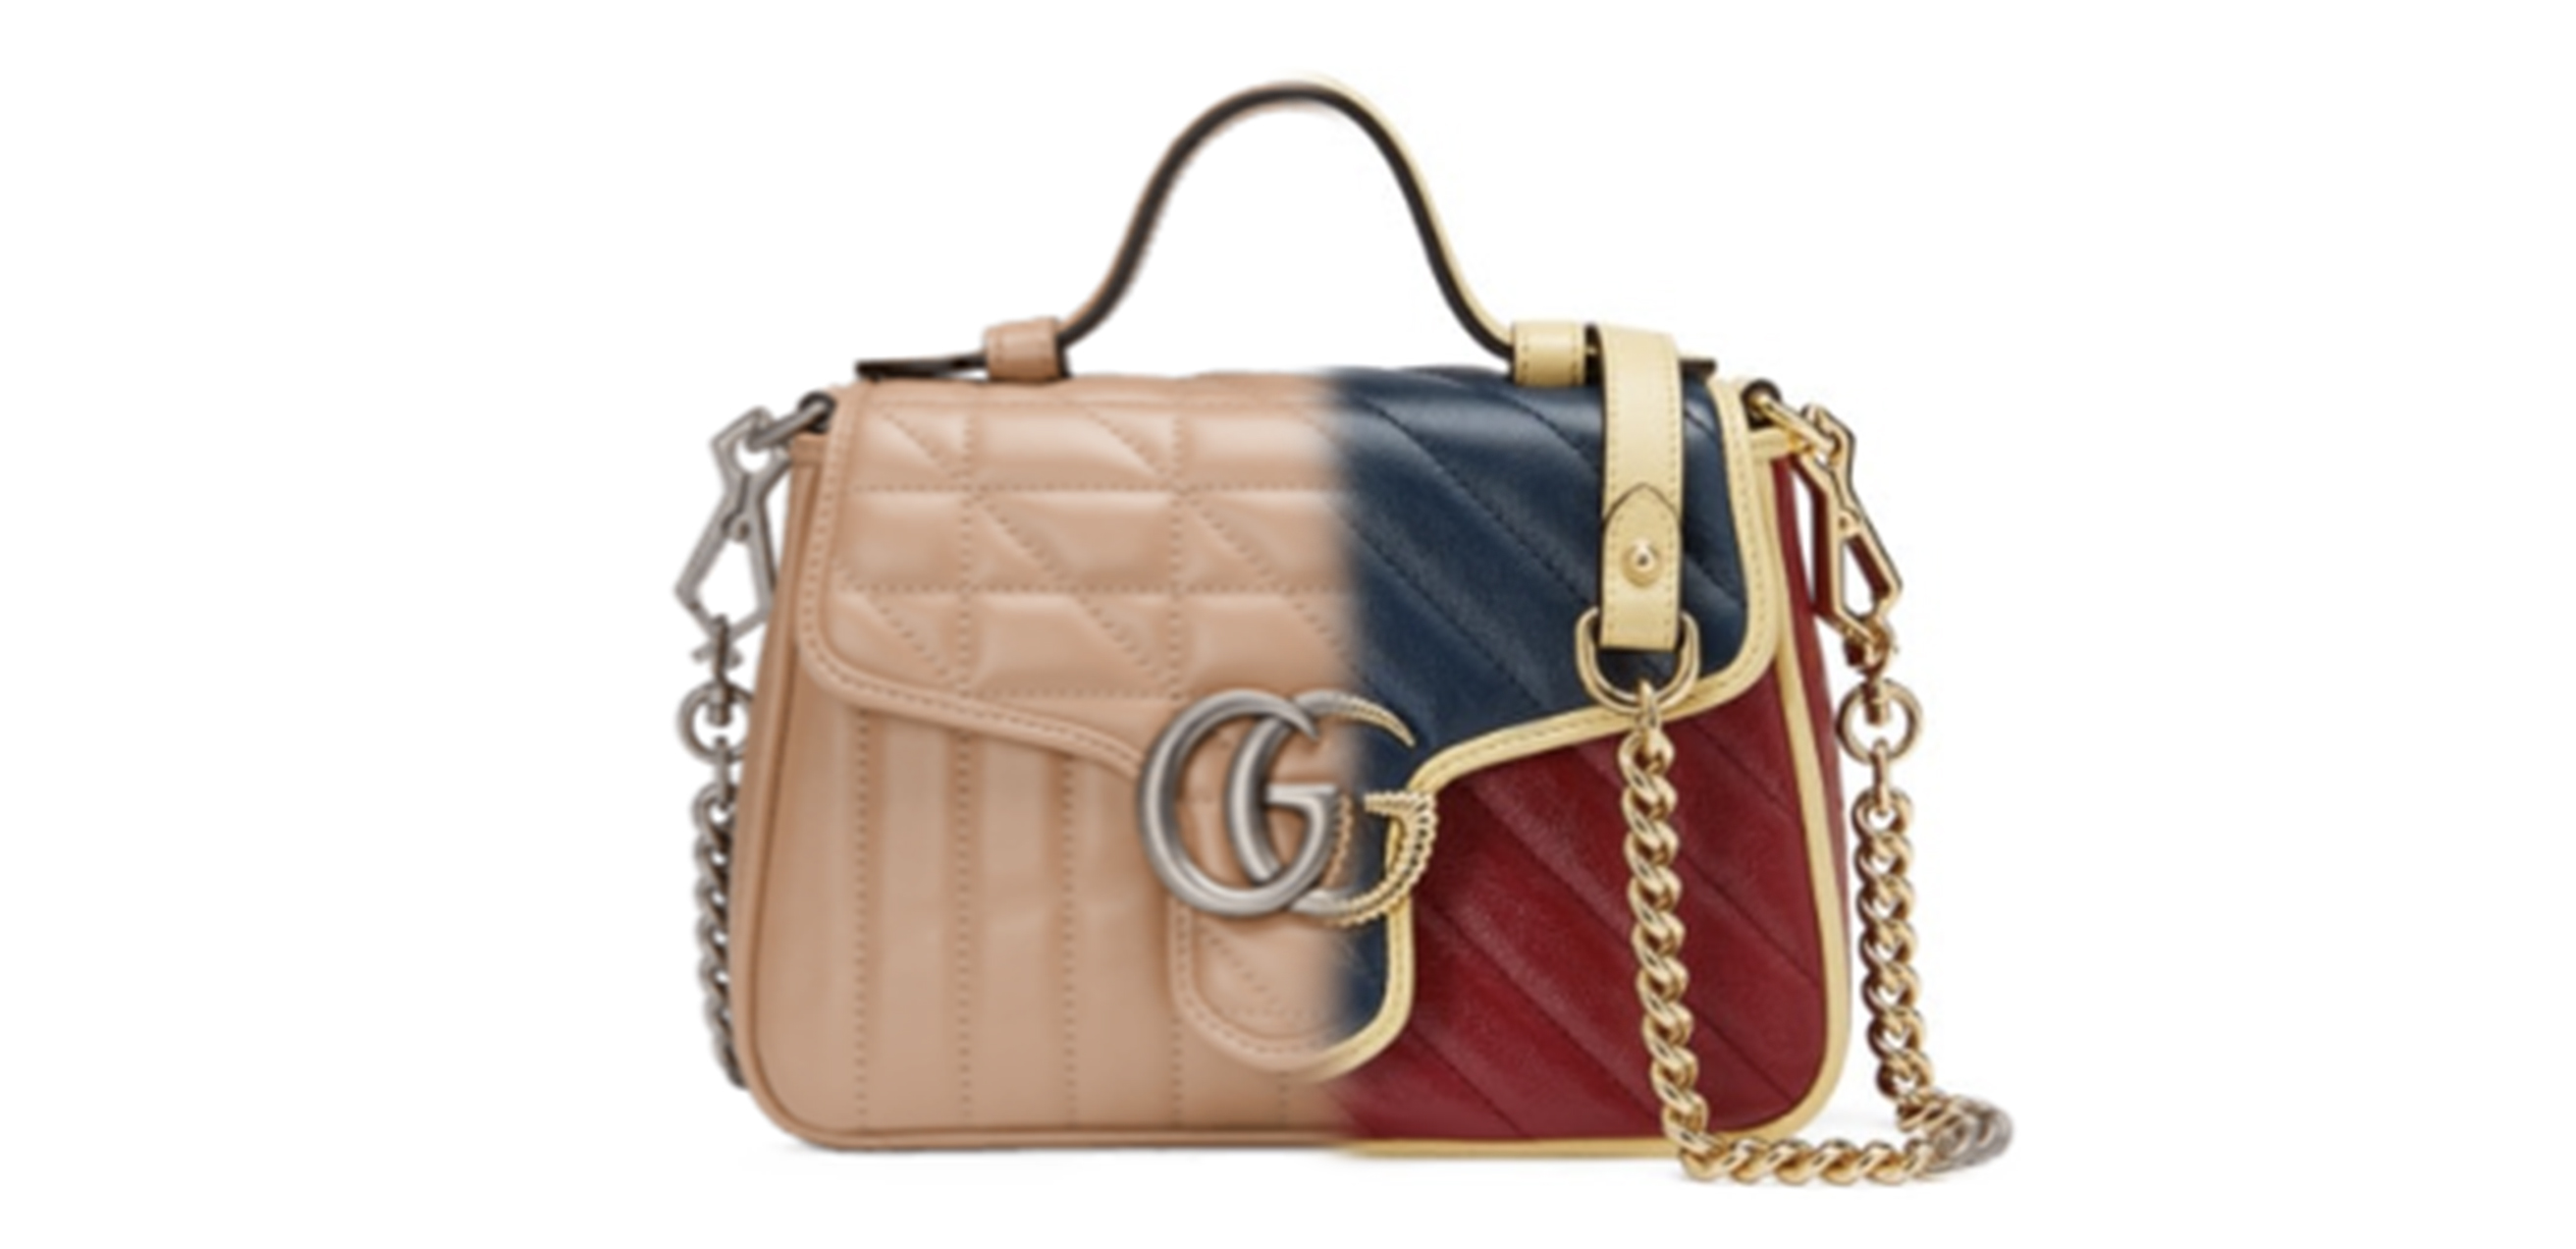 Gucci Marmont: Ultimate Bag Guide